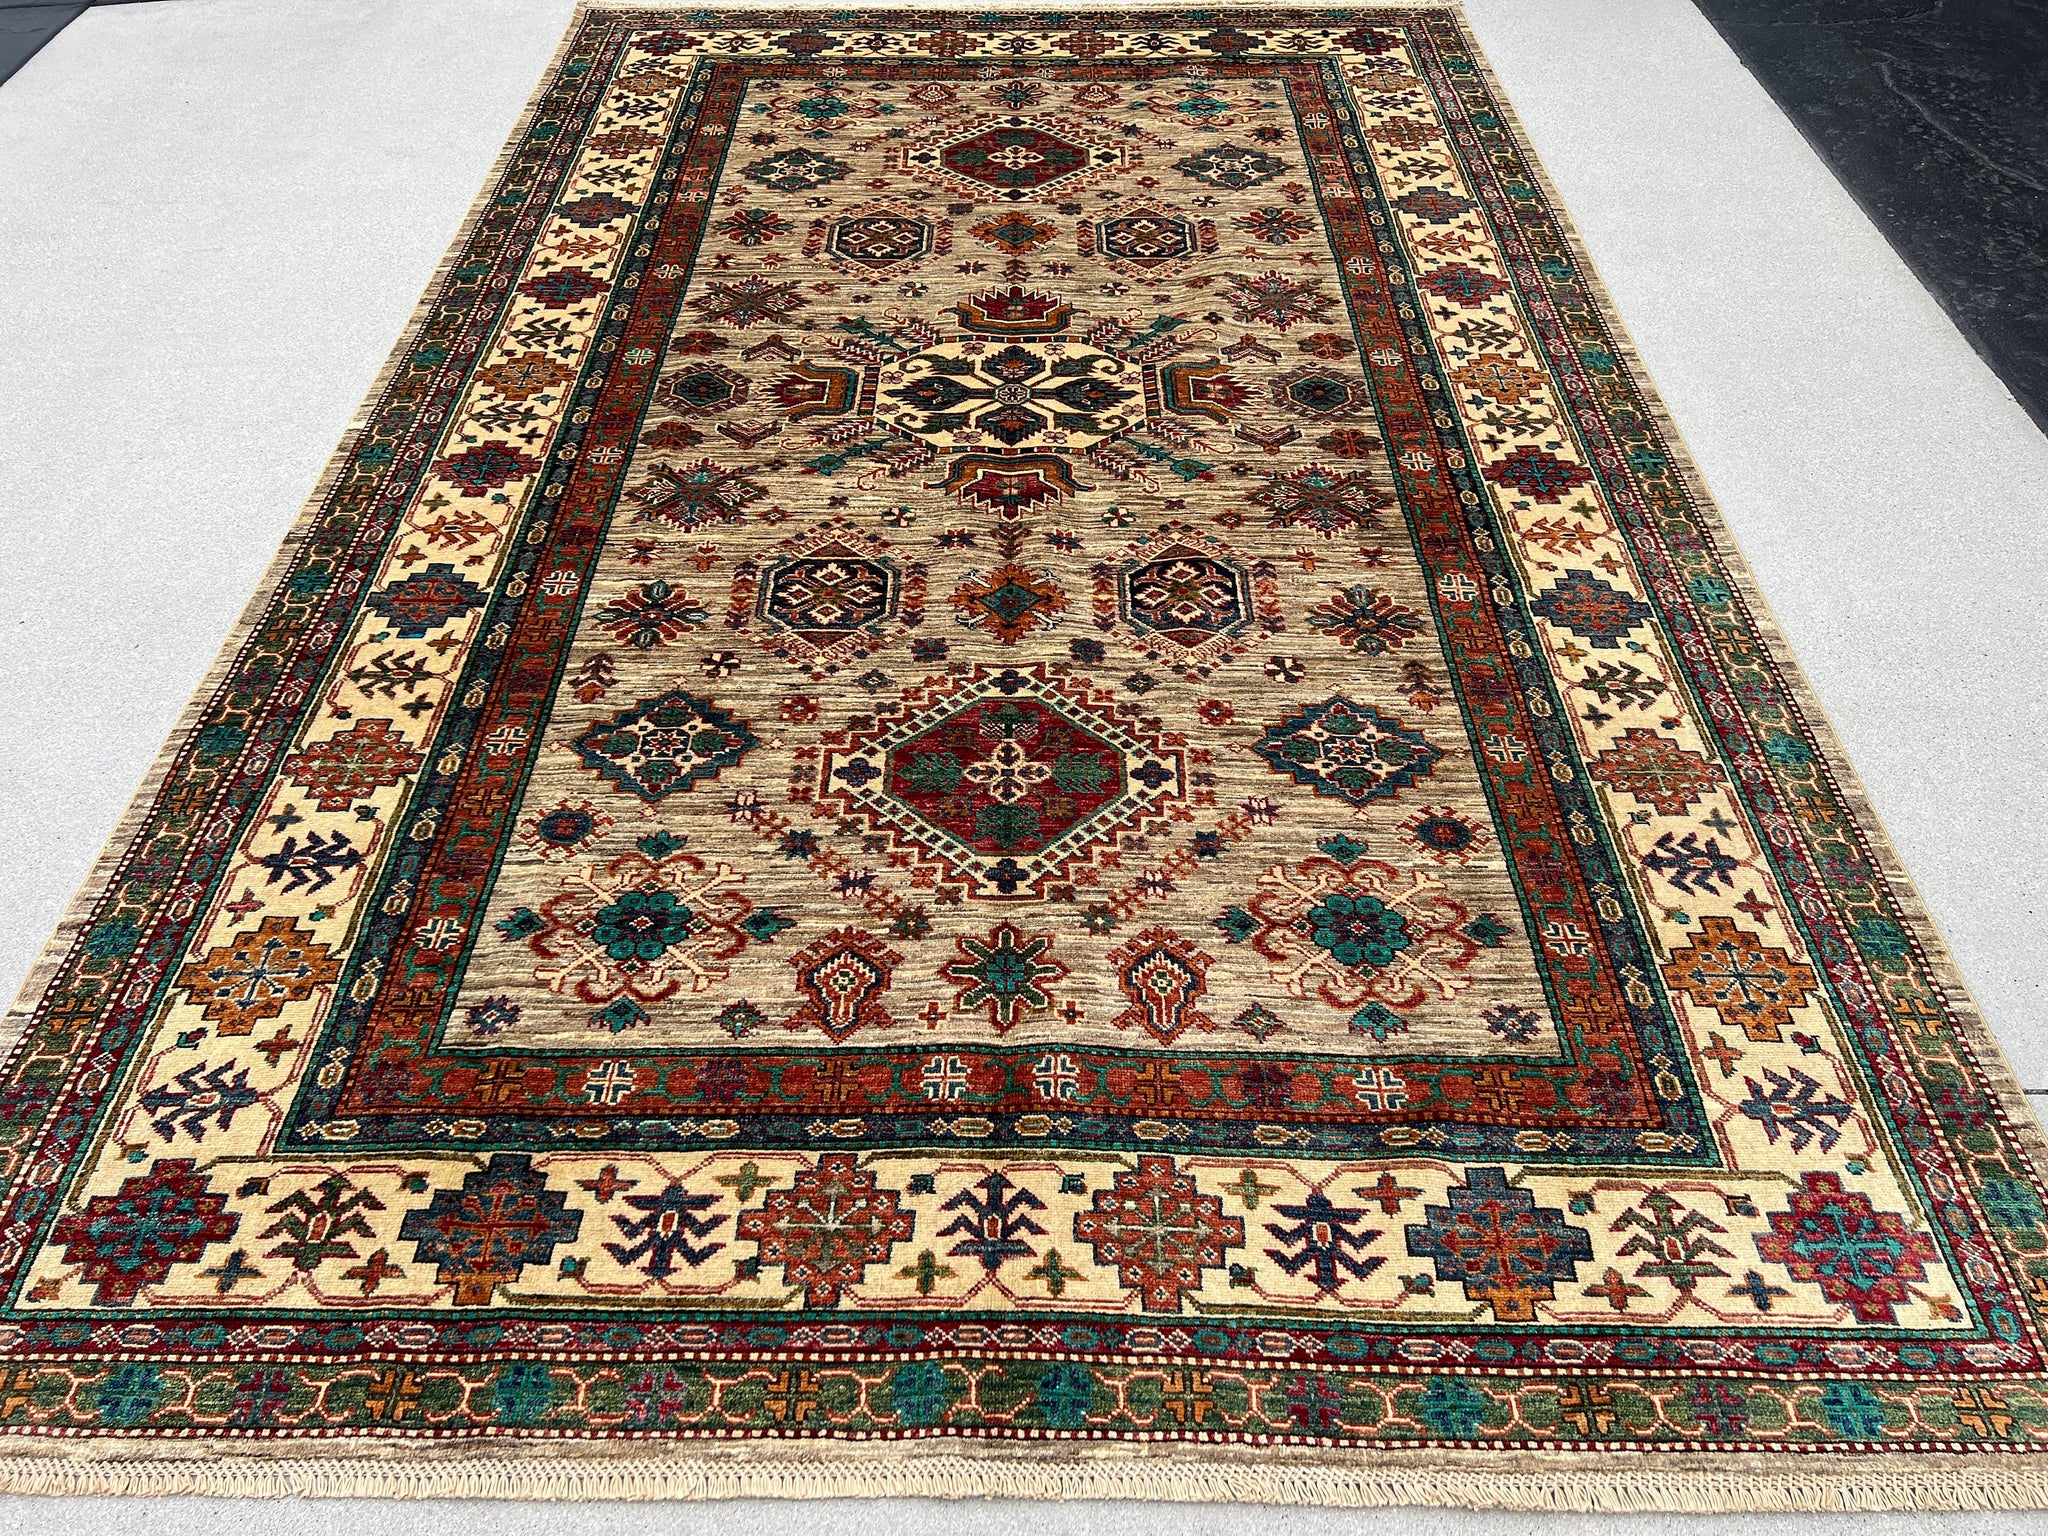 7x10 (215x305) Handmade Afghan Rug | Beige Brown Cream Teal Turquoise Red Caramel Terracotta Green Blue Ivory | Hand Knotted Wool Persian